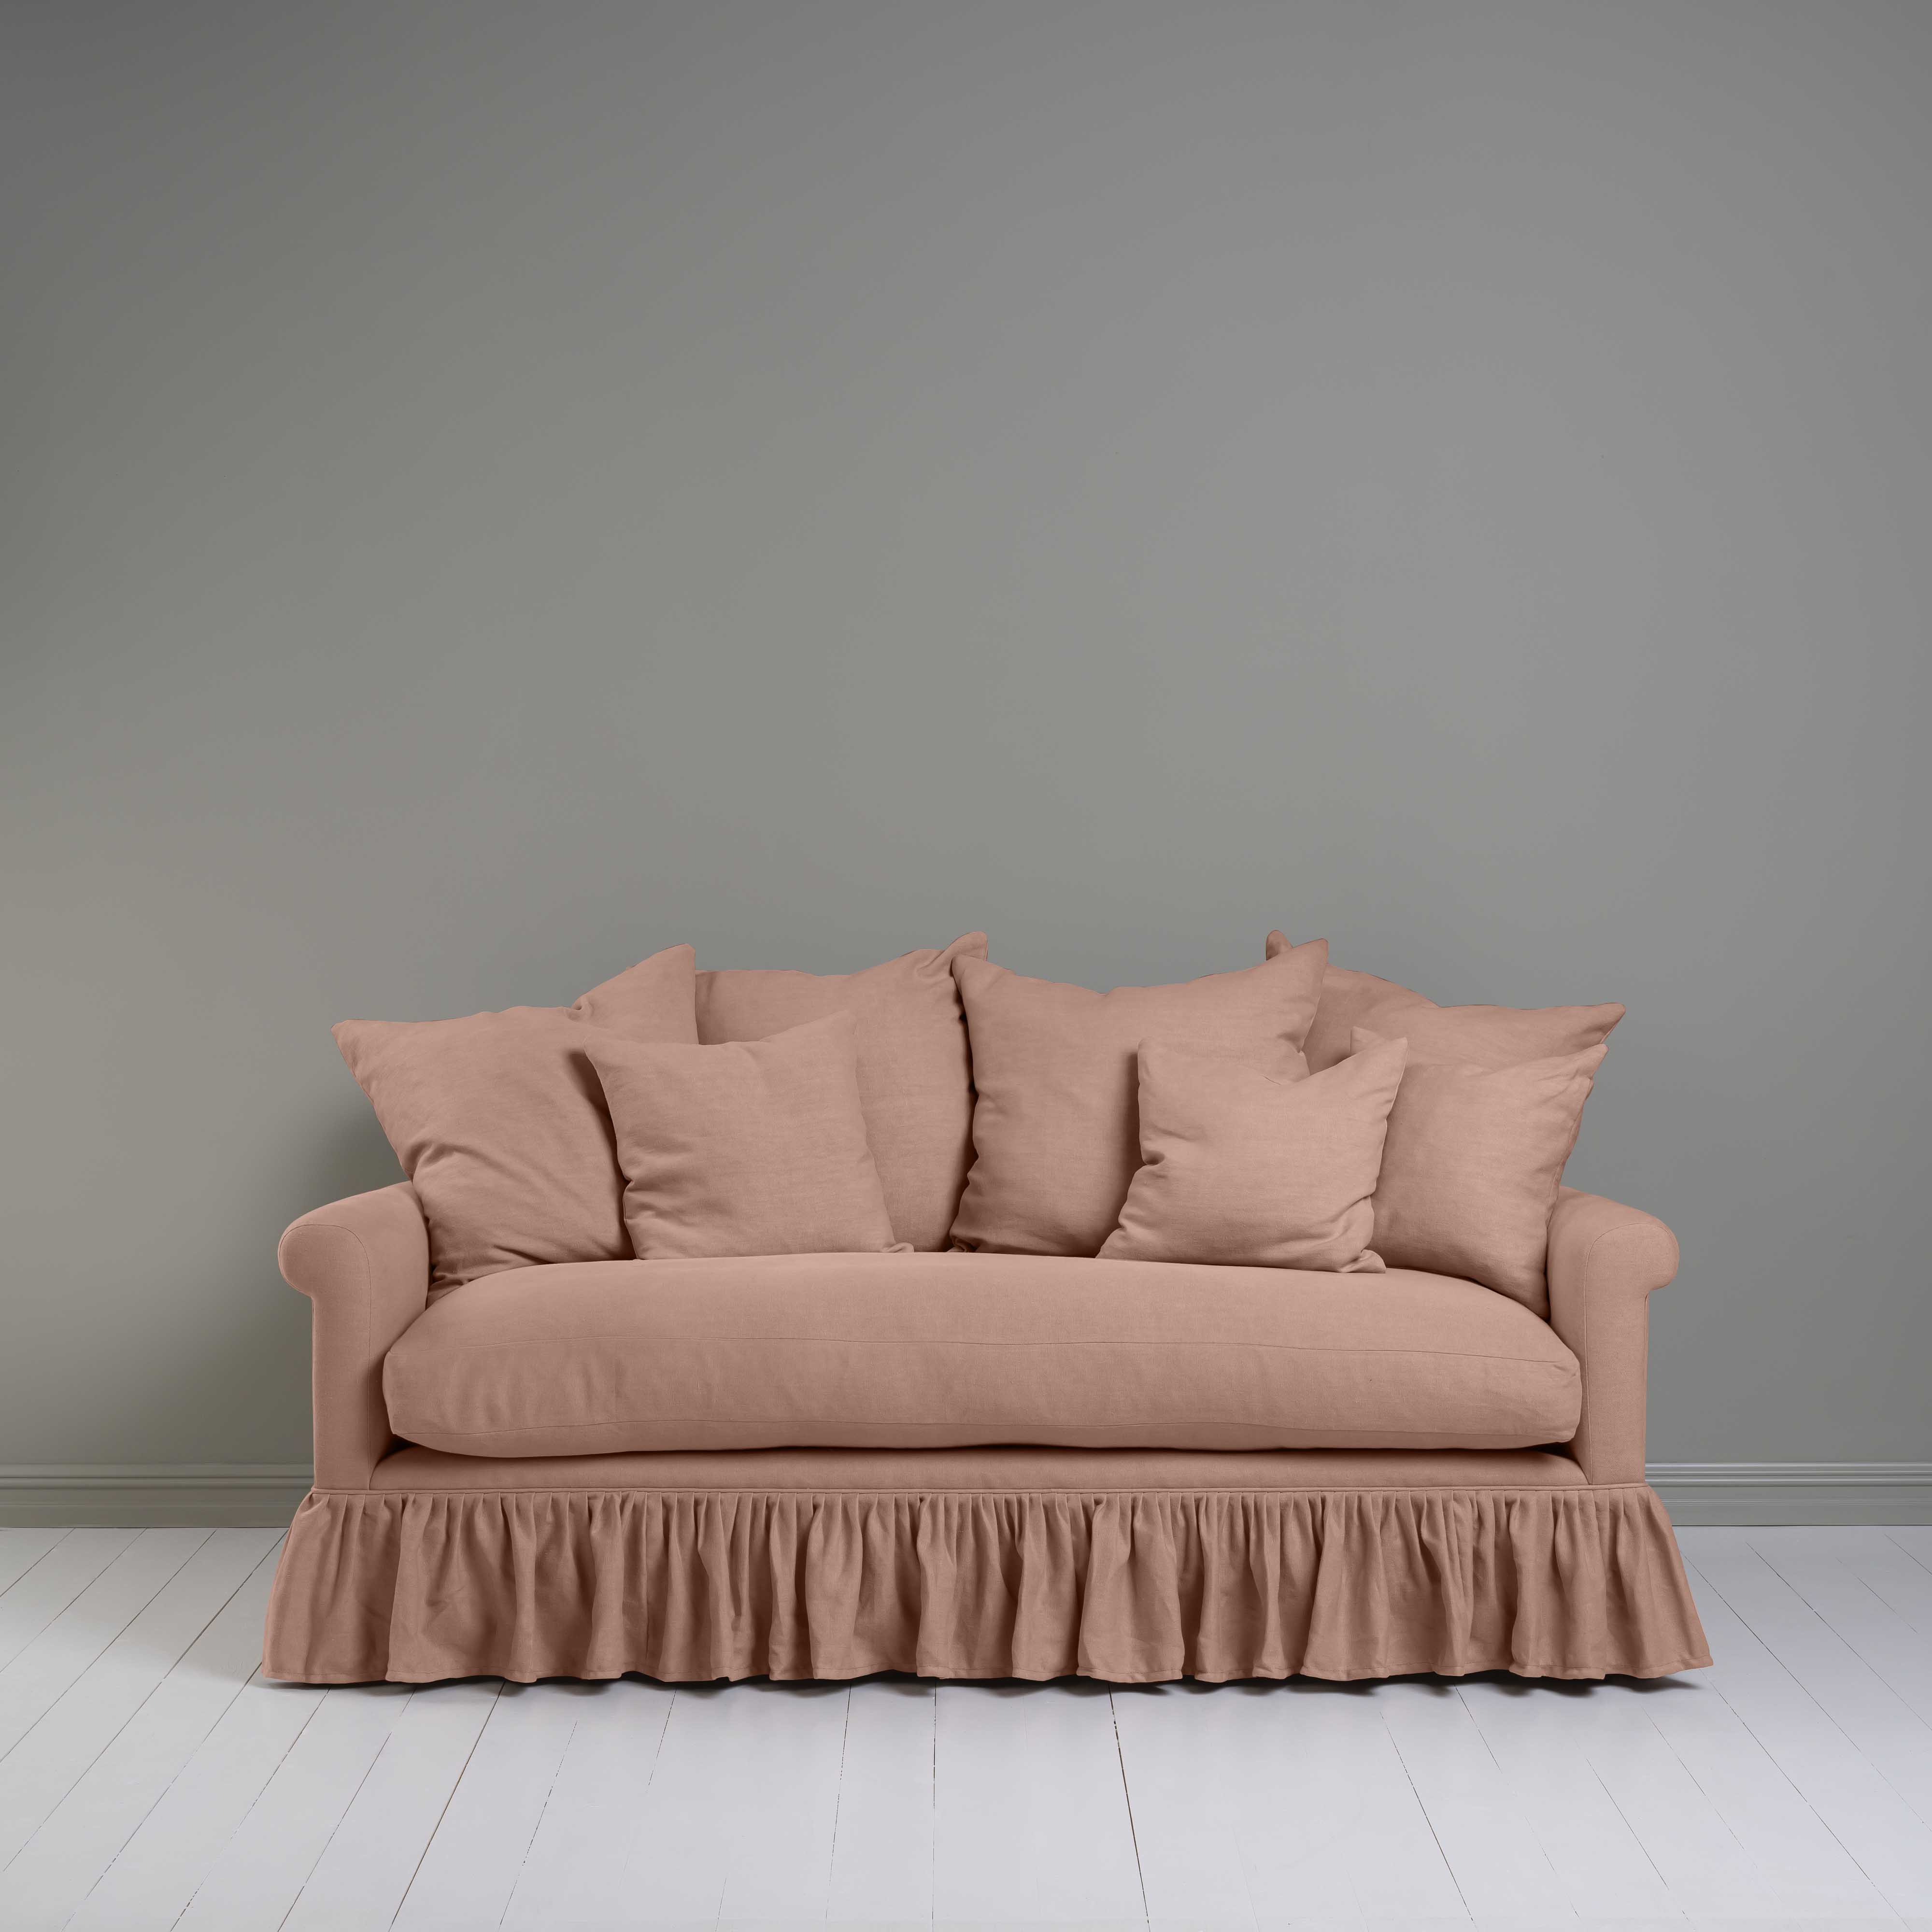  Curtain Call 3 Seater Sofa in Laidback Linen Roseberry 